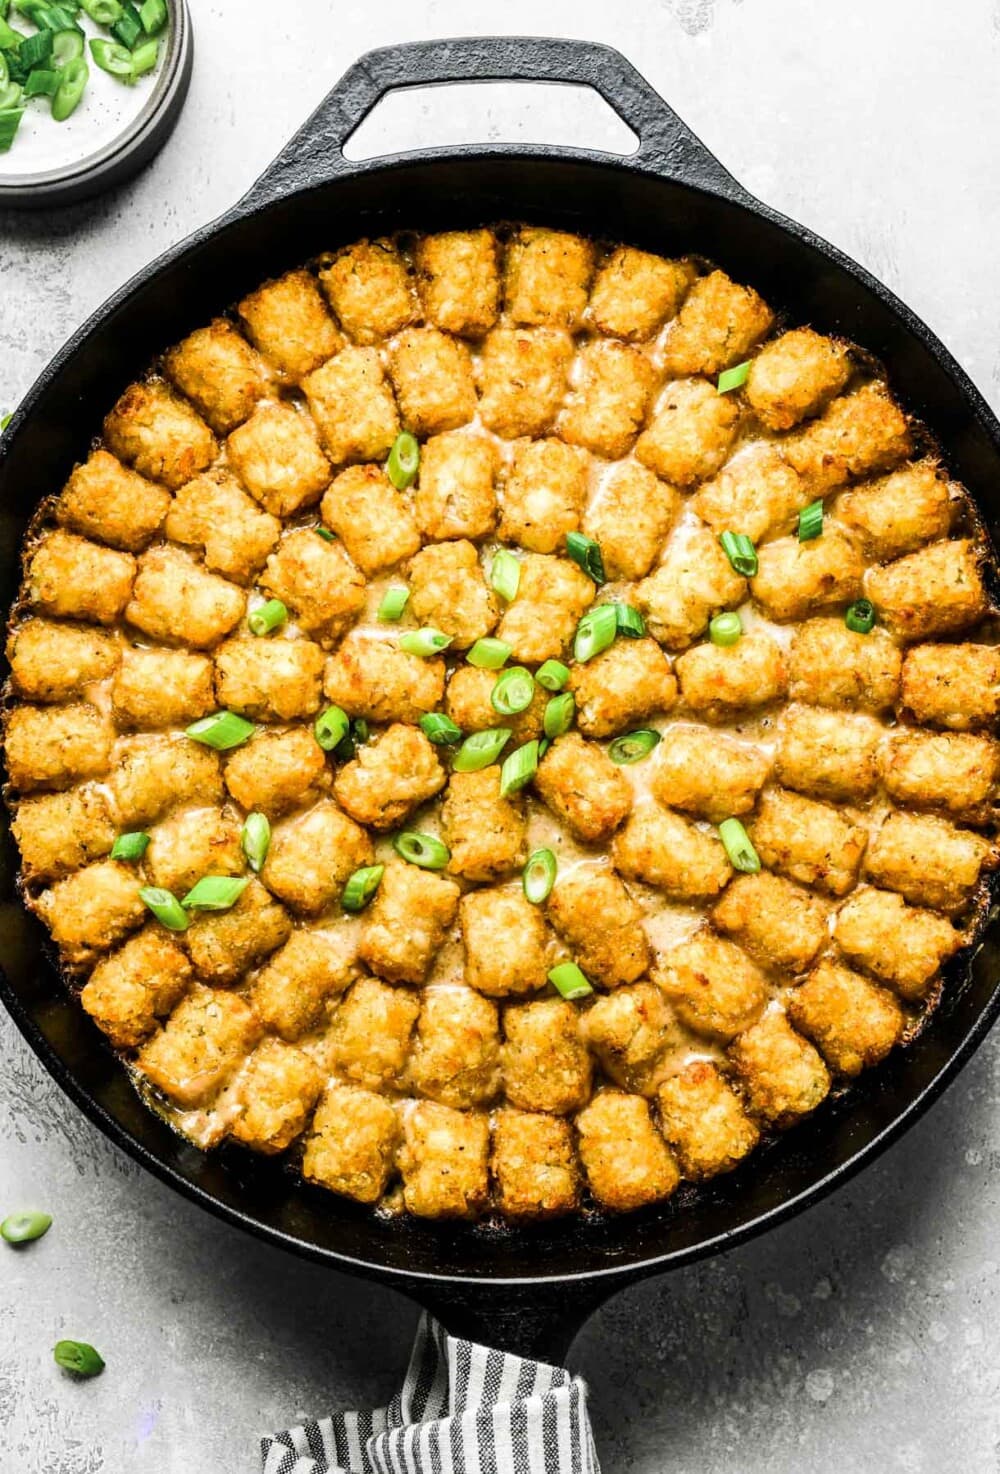 tater tot hotdish baked in a cast iron skillet with green onion garnish.